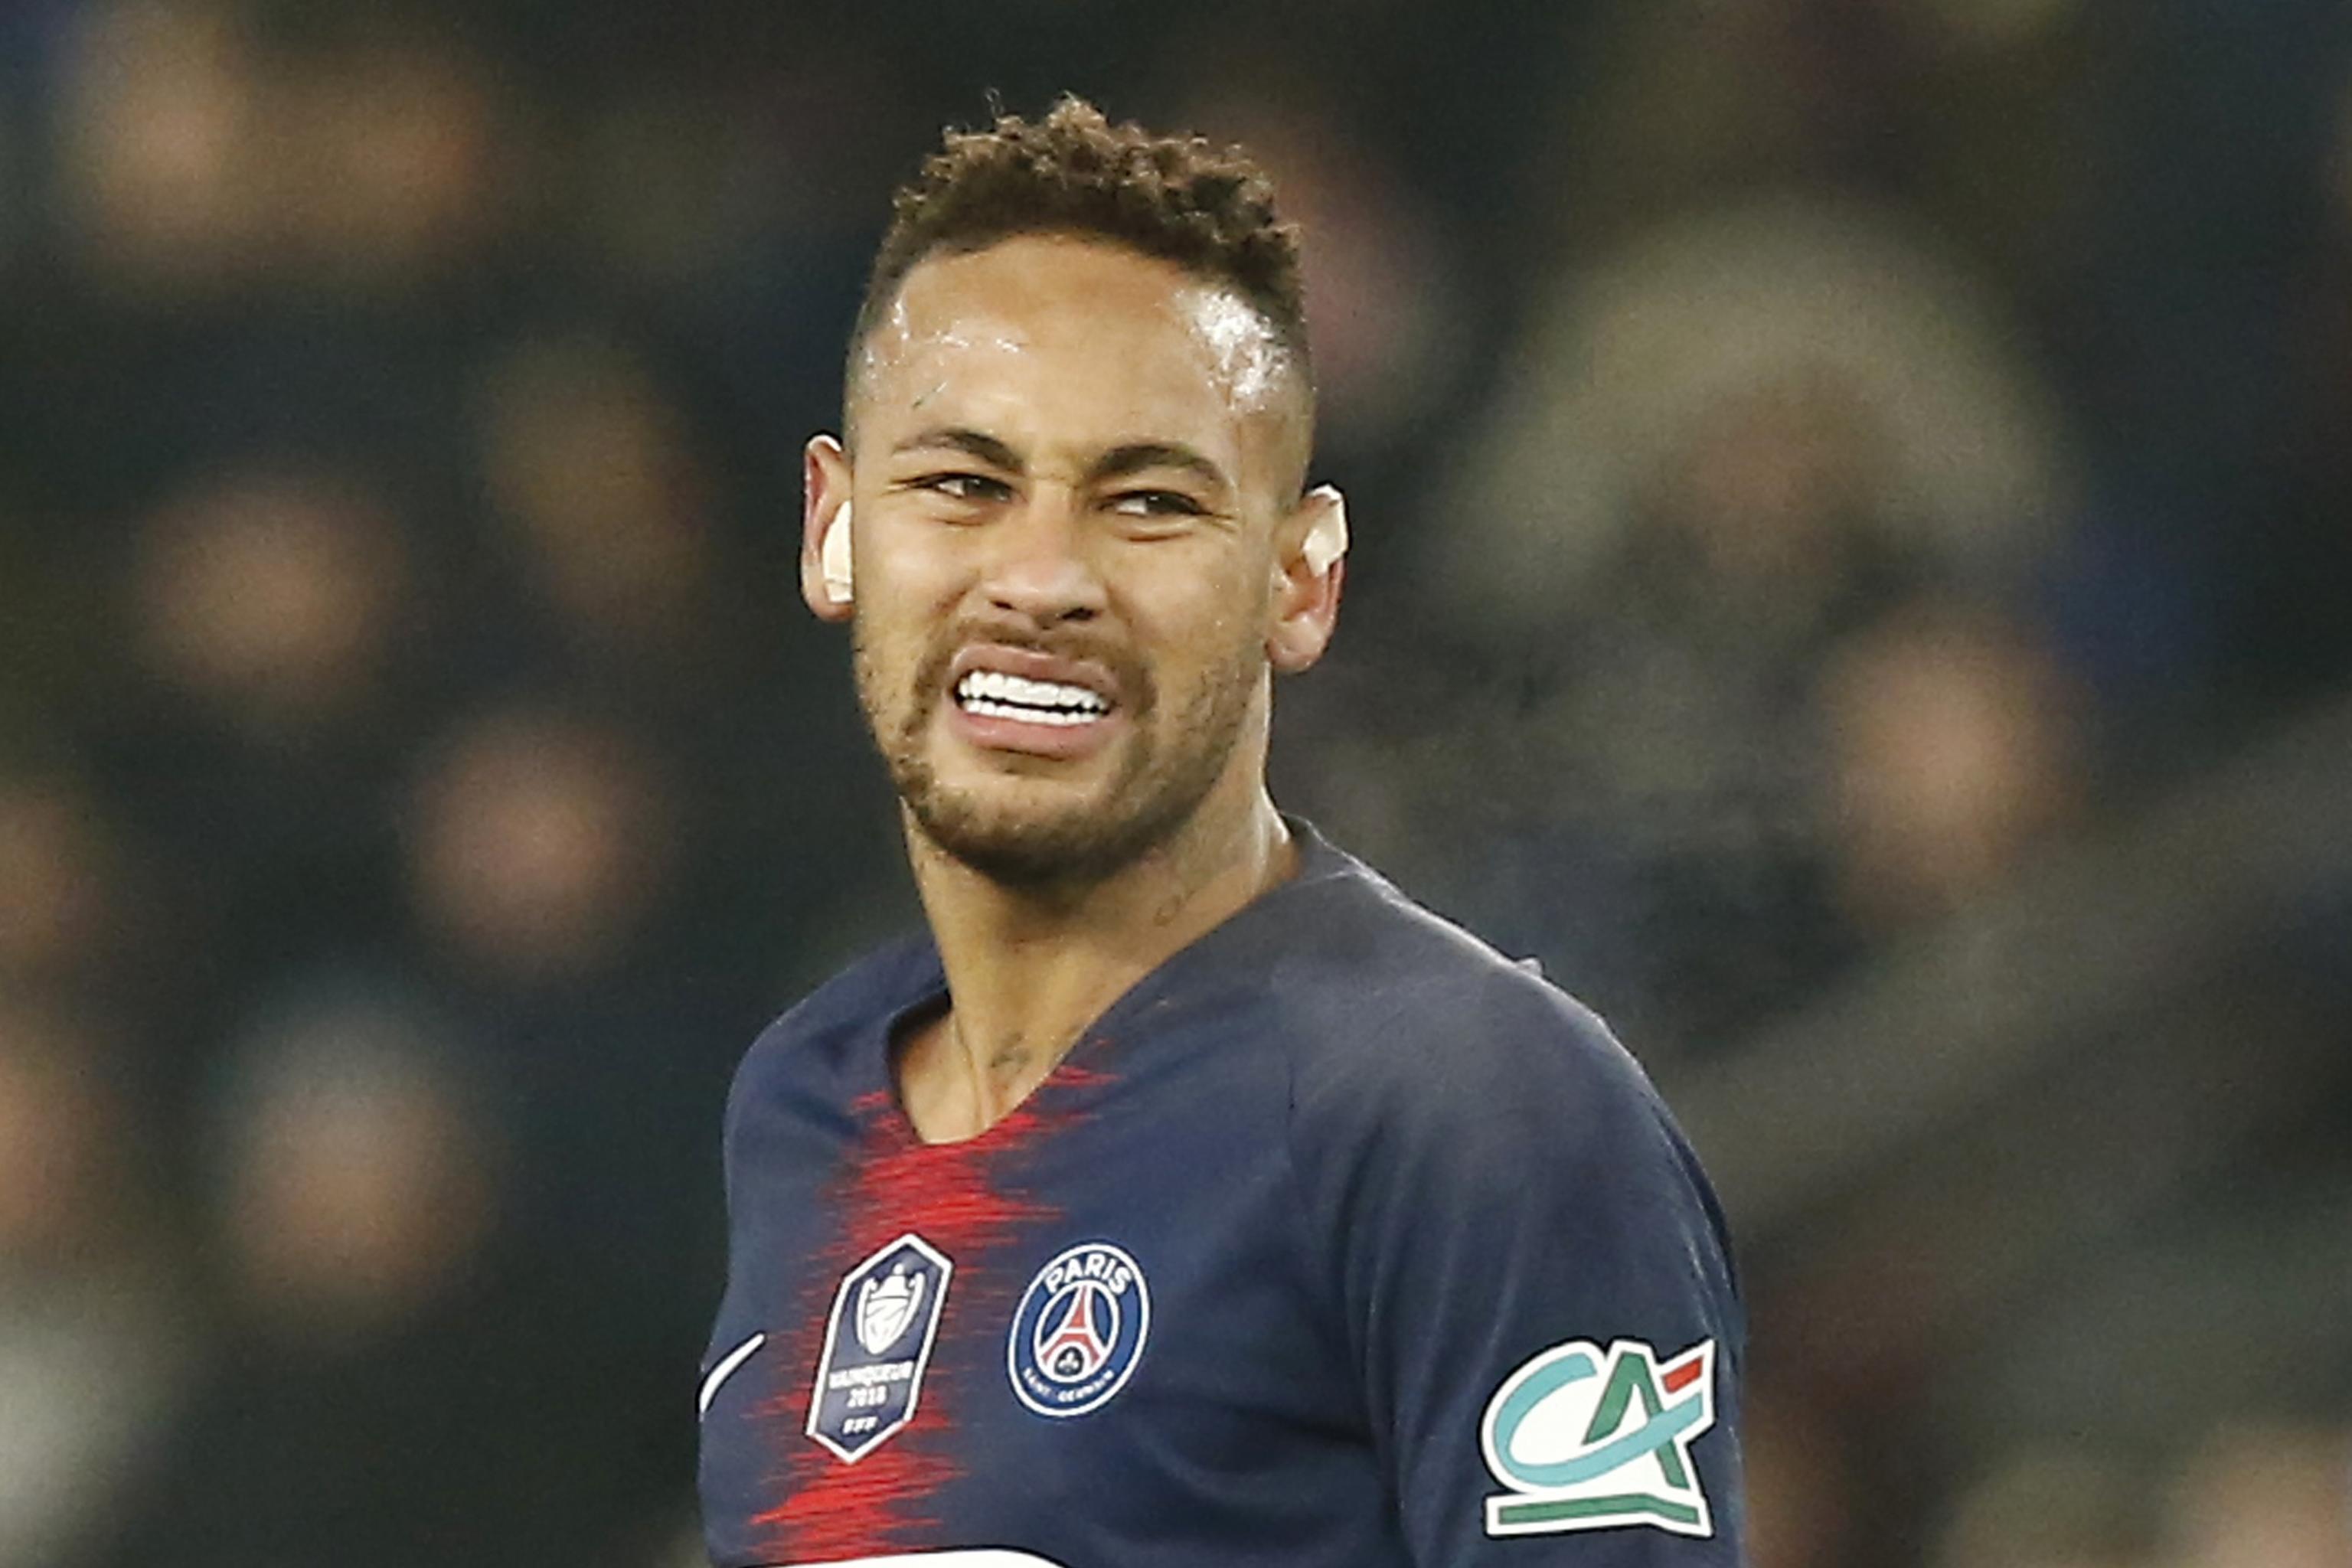 I would not be at the top level if I were not serious' - Neymar